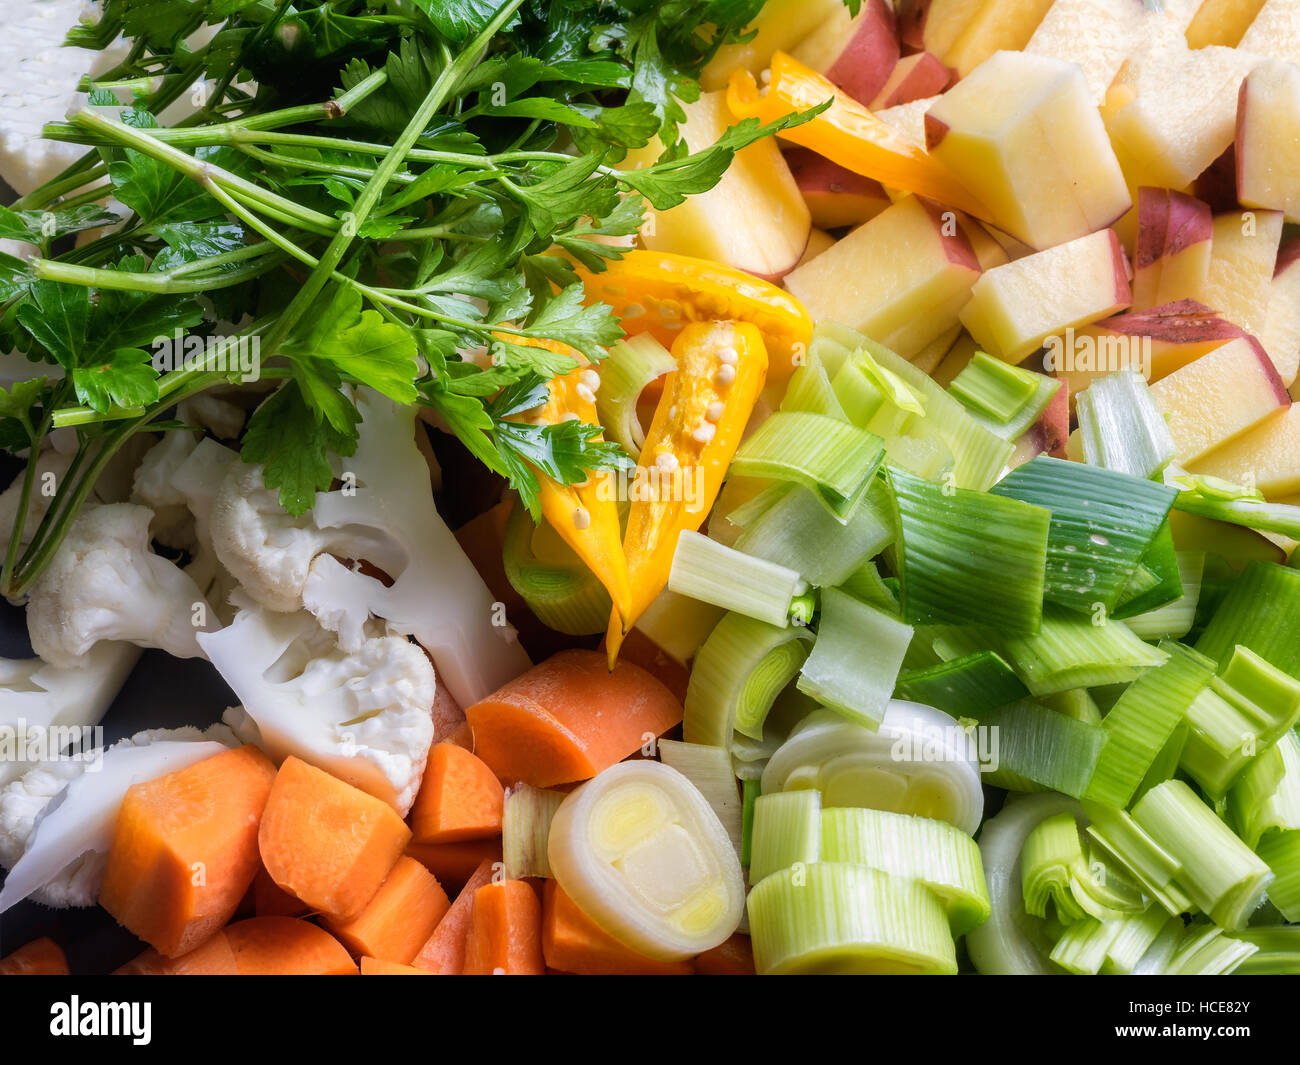 Mixed chopped vegetables prepared to cook Stock Photo